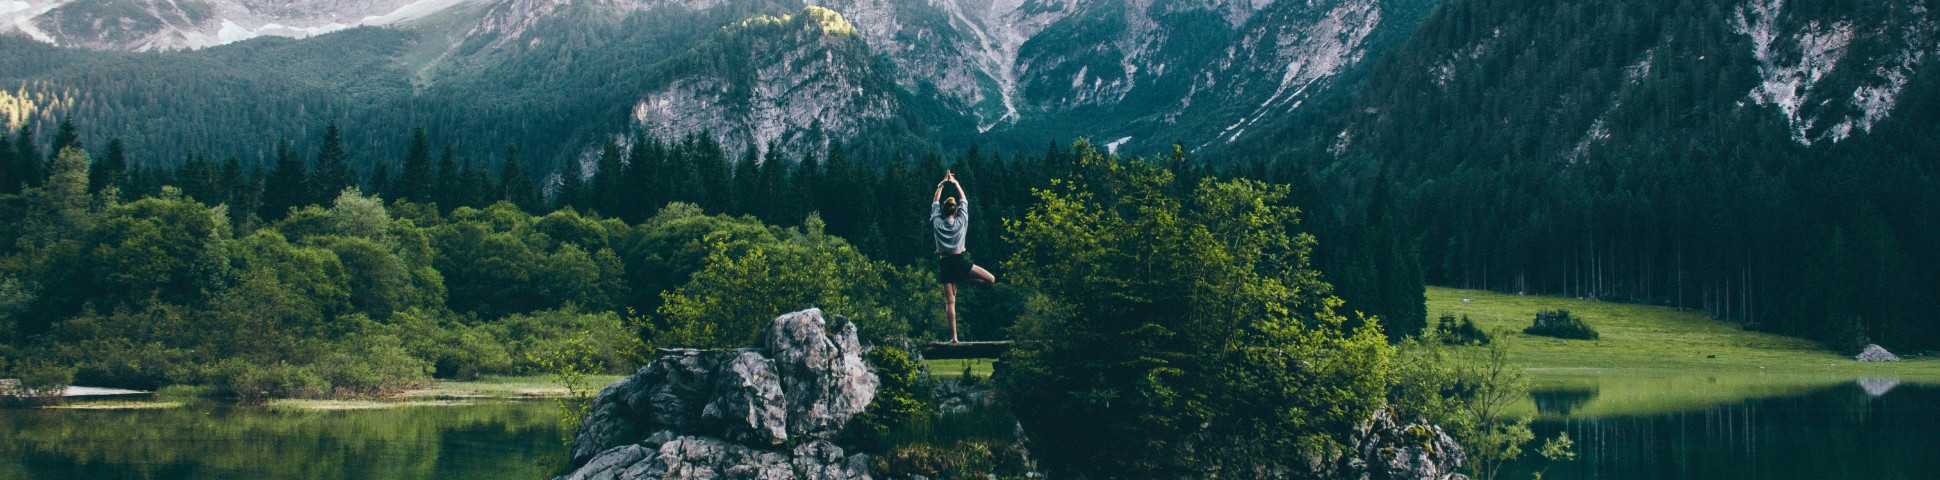 Lady doing Yoga in wilderness